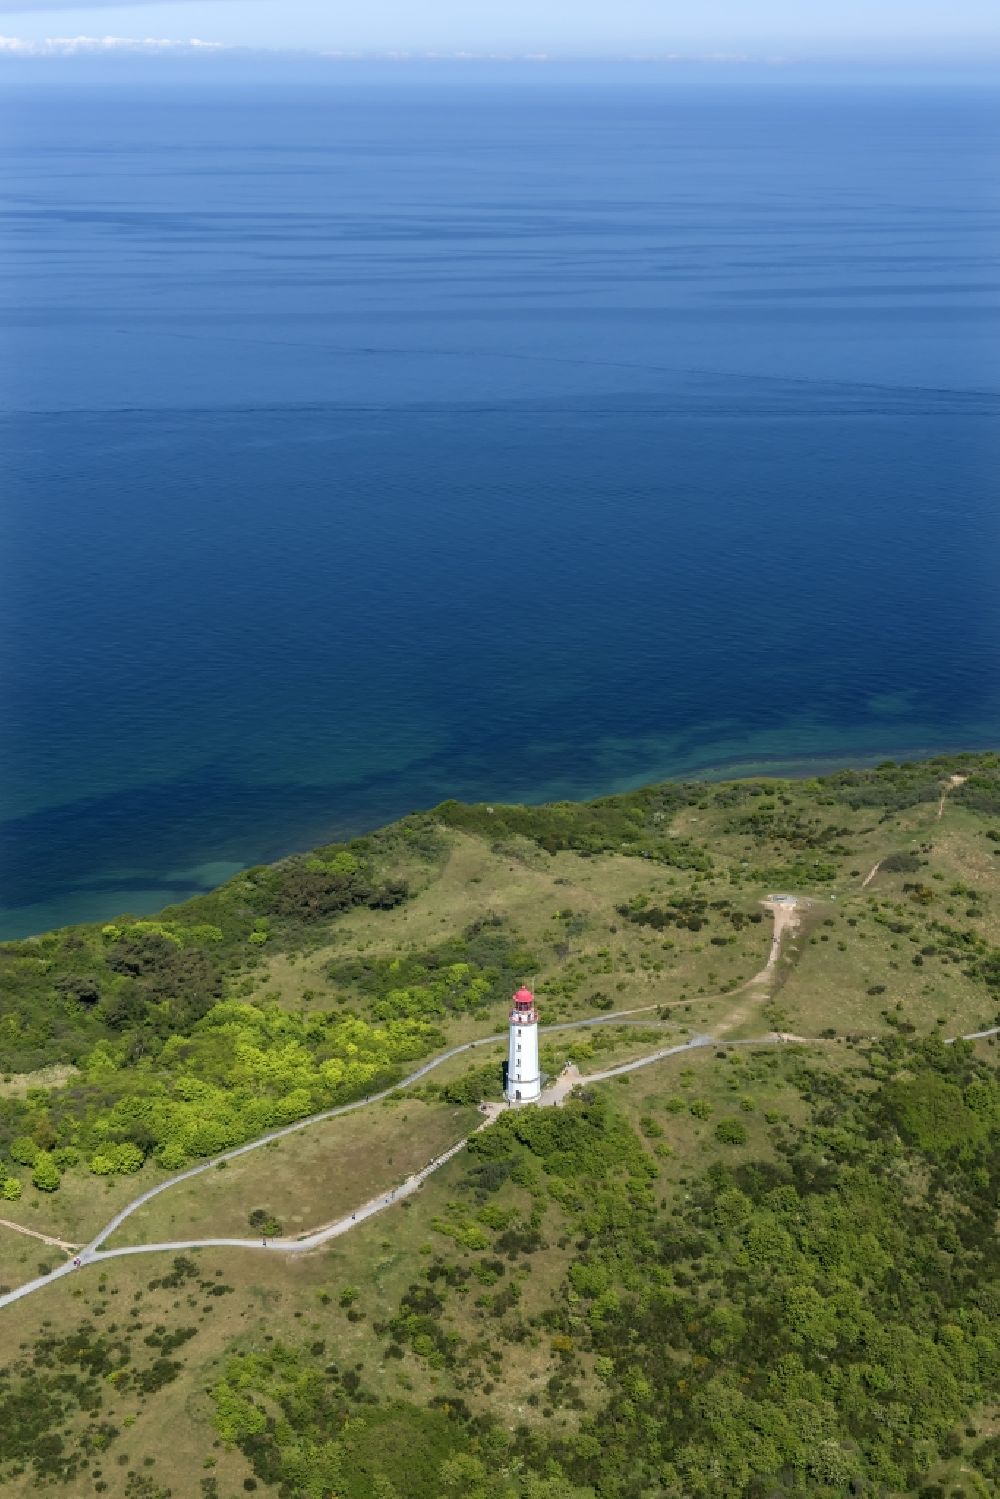 Aerial image Insel Hiddensee - Lighthouse Dornbusch as a historic seafaring character in the coastal area of the baltic sea isaland Hiddensee in the state Mecklenburg - Western Pomerania